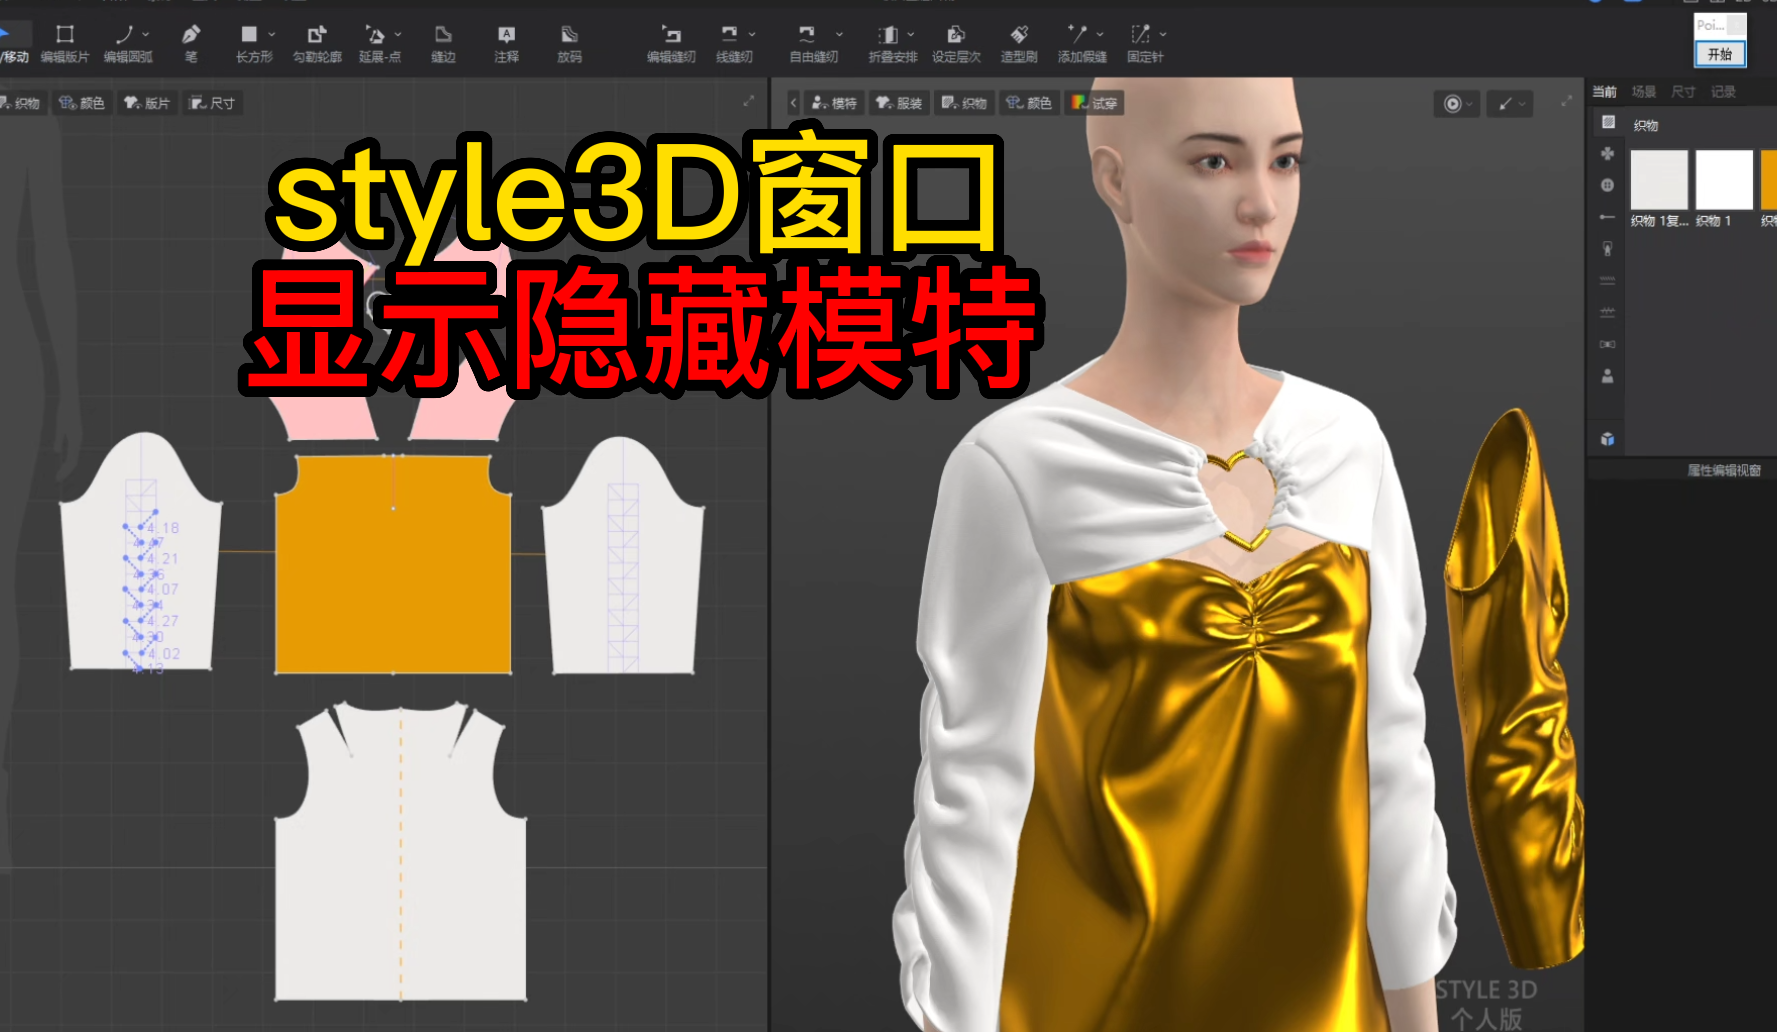 45style3D窗口-显示隐藏模特.png